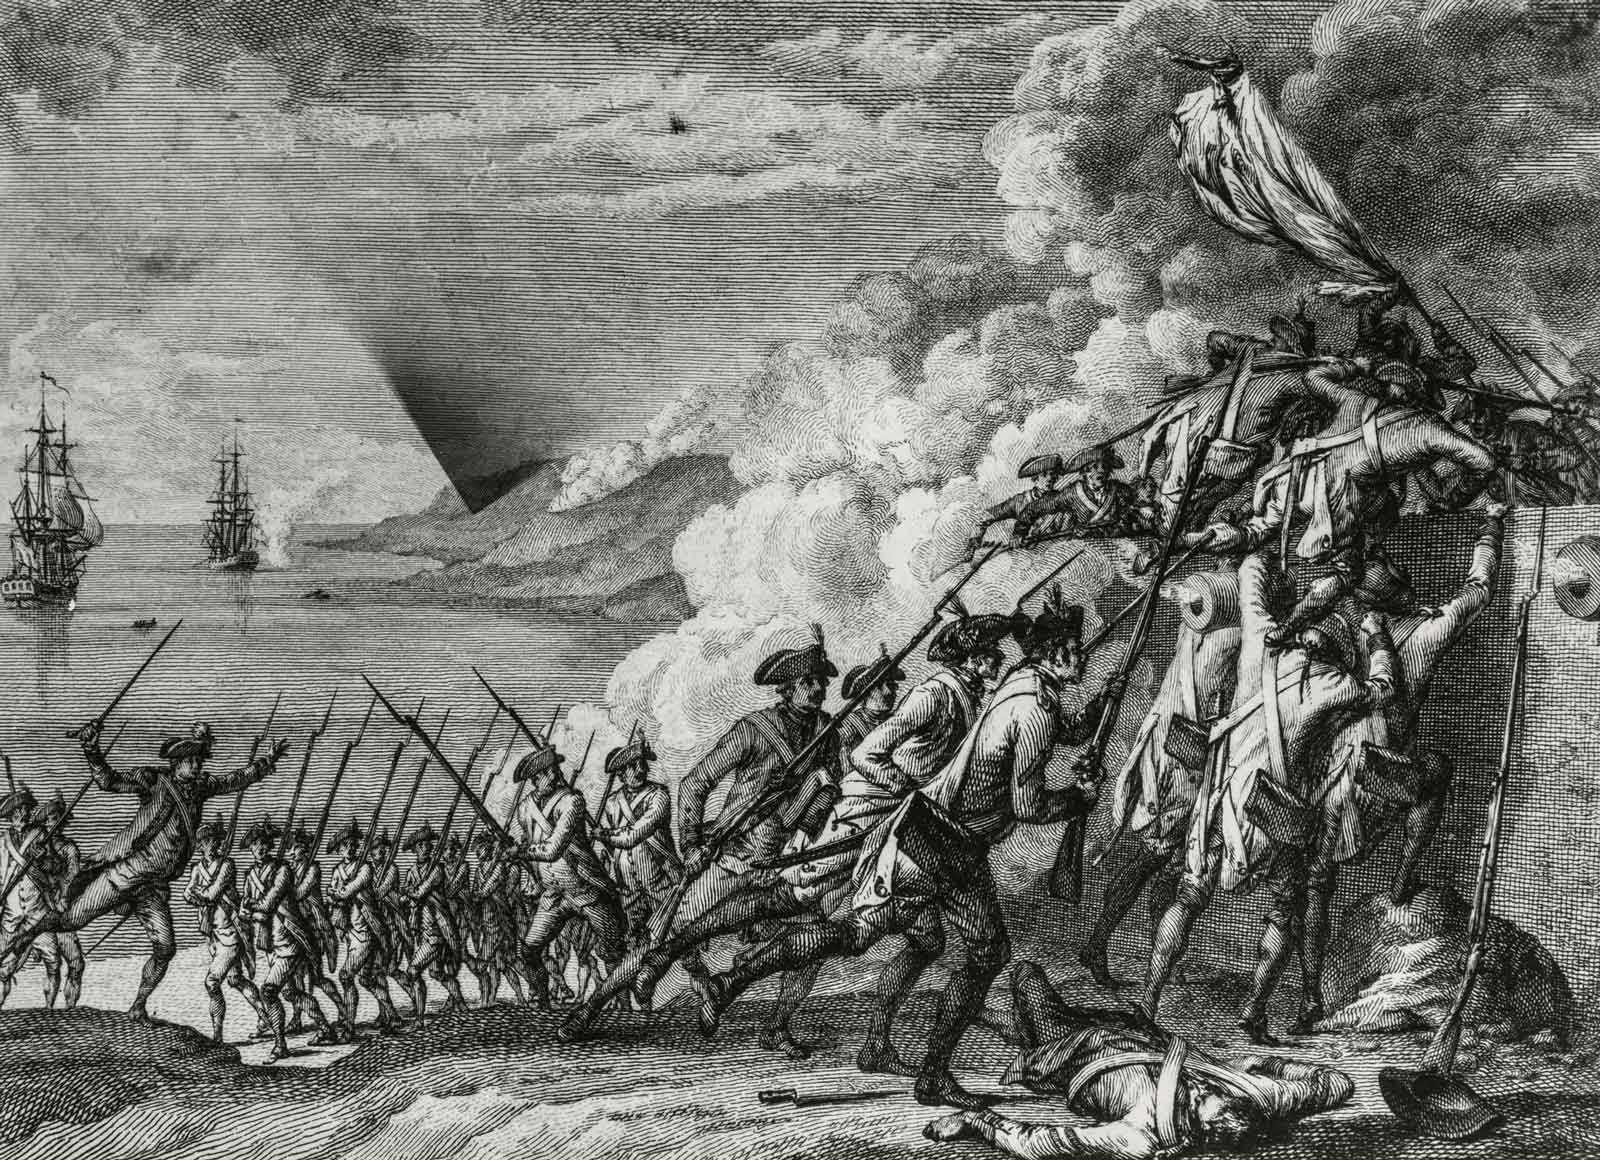 An illustration depicting troops sent by Napoleon attacking Haiti in 1801.